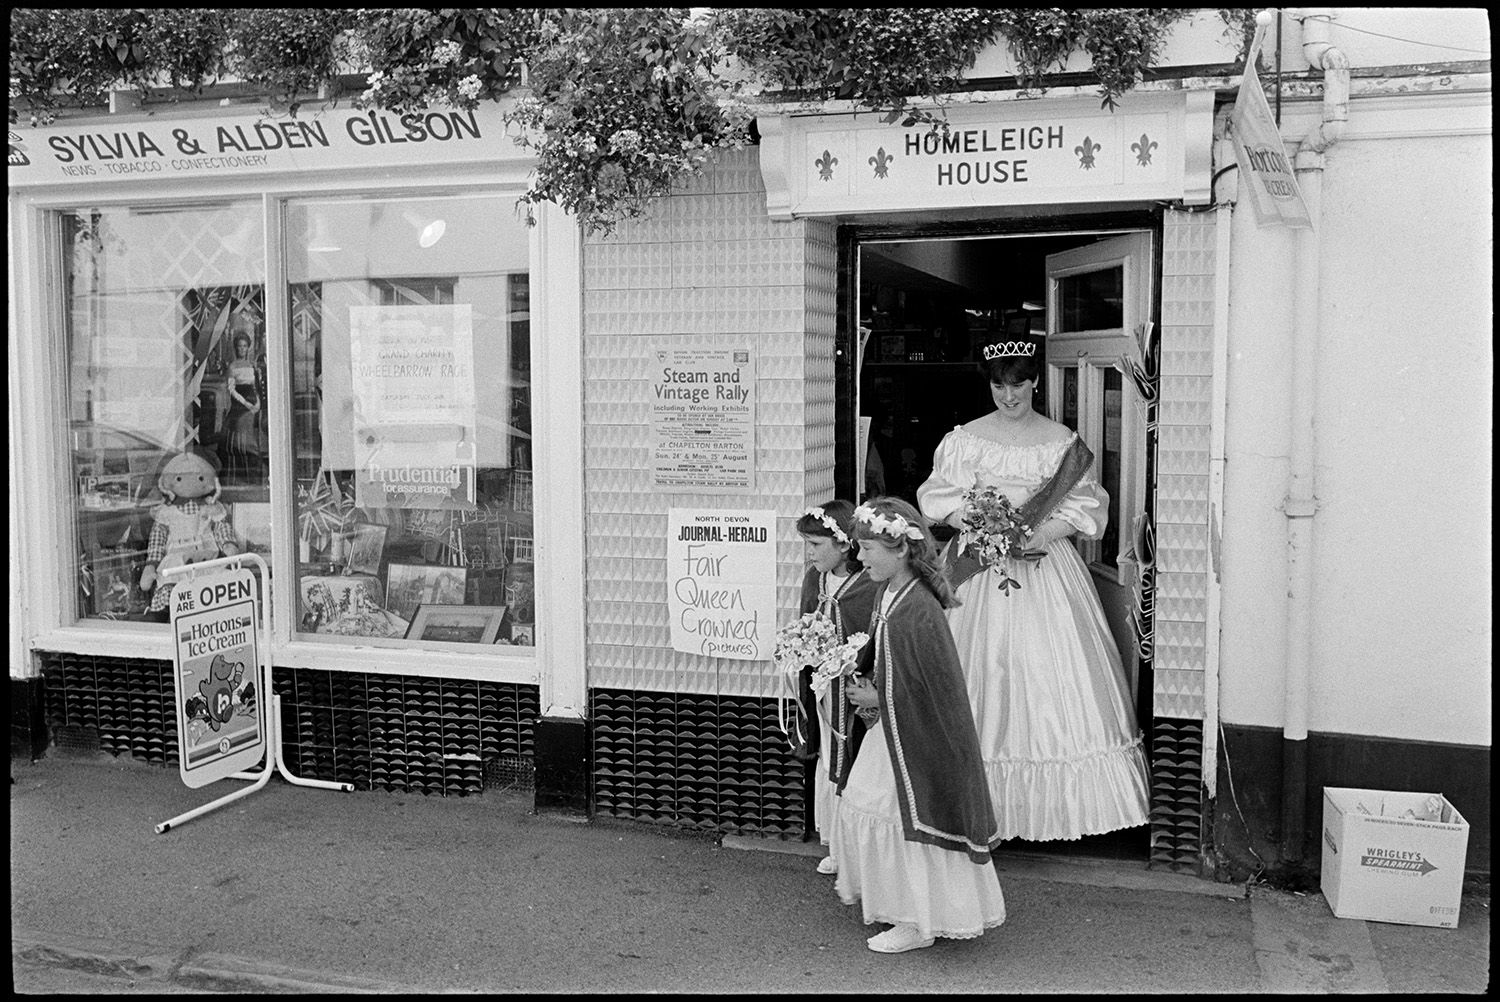 Fair Queen and attendants in street outside newsagents shop and in town hall. White dress. 
[Emma Bending, the Chulmleigh Fair Queen coming out of a newsagents shop with two attendants, at Homeleigh House in Chulmleigh. She is wearing a white dress and a sash. The names Sylvia & Alden Gilson are above the shop window. A doll and framed pictures are displayed in the window. Two posters are pinned up outside the hop doorway, including an advert for a Steam and Vintage Rally.]